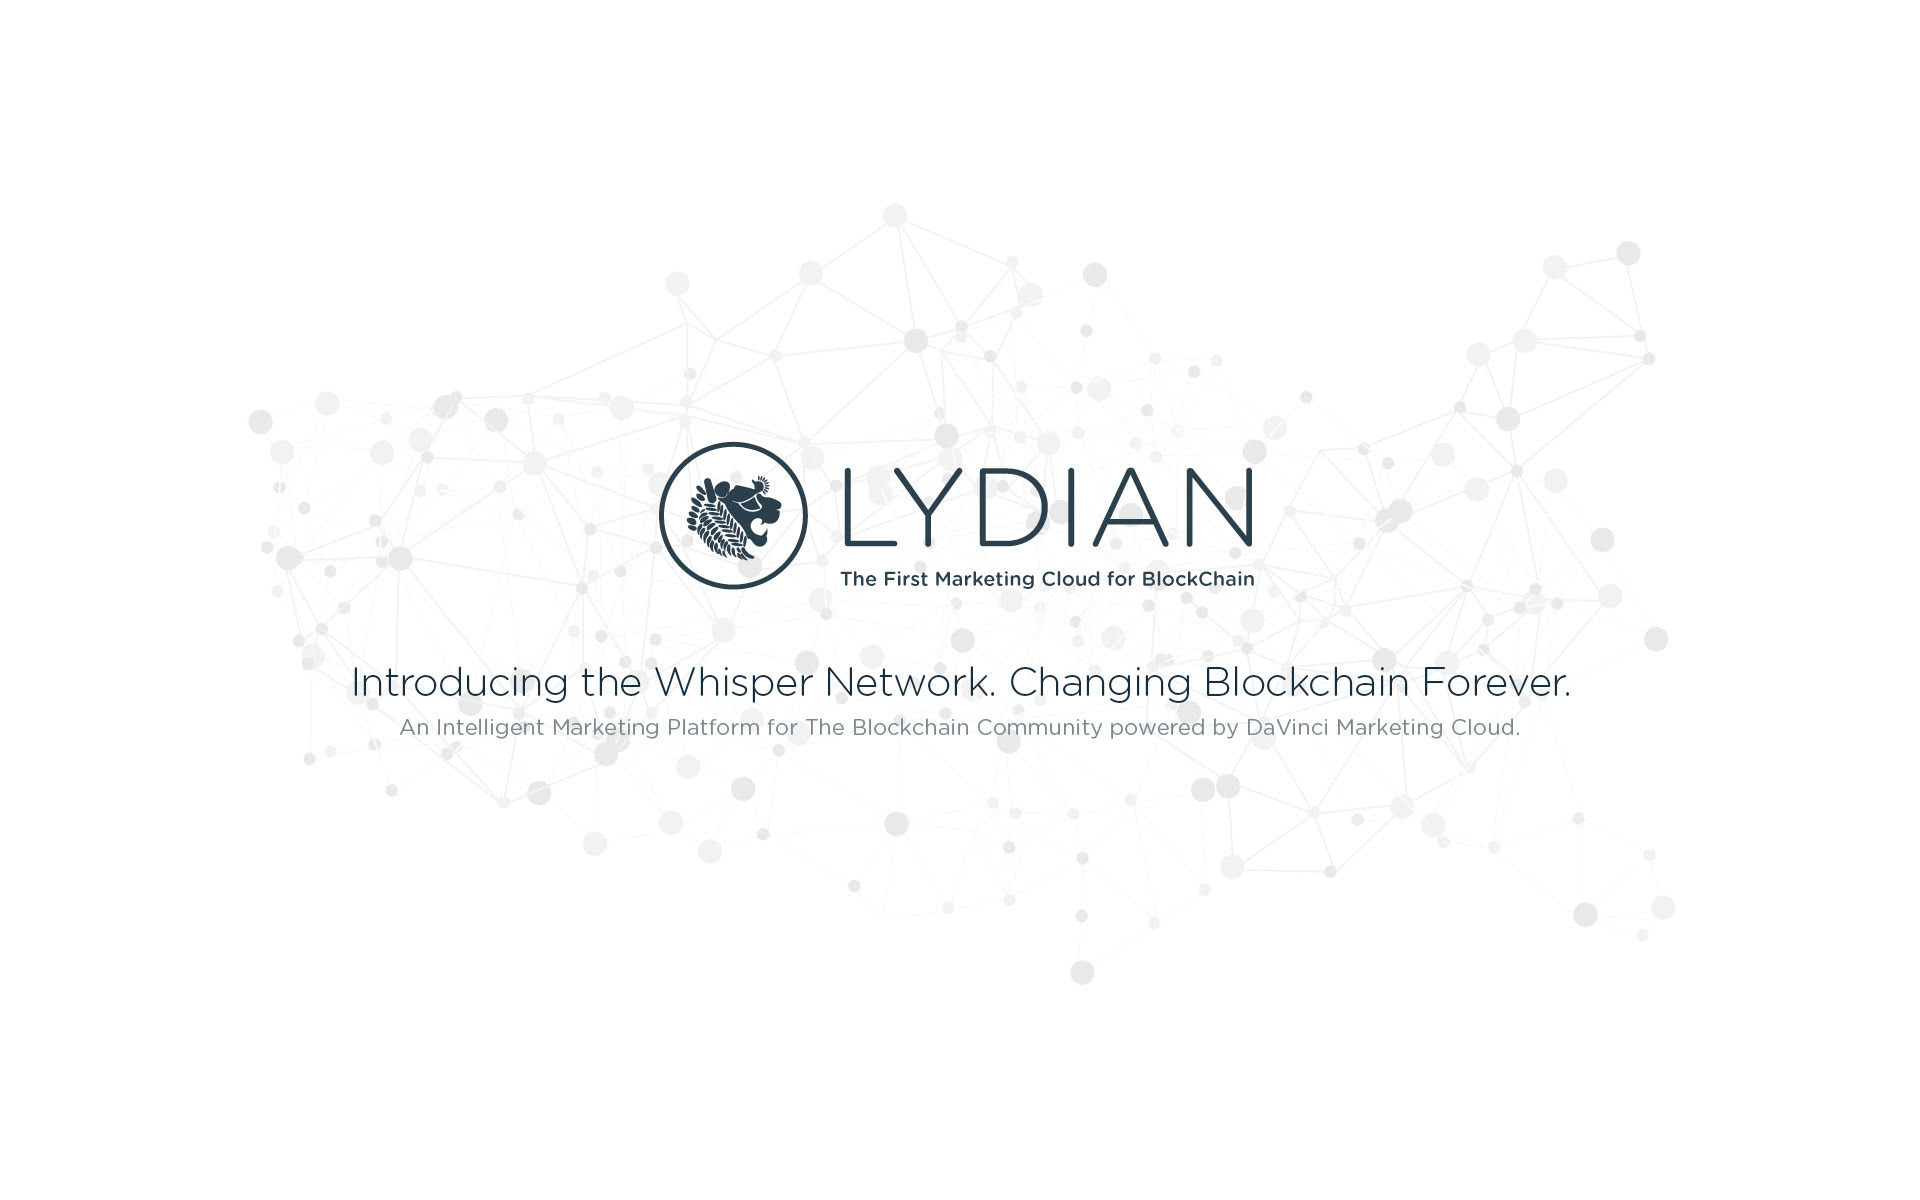 Marketing Cloud Lydian Adds New Advisers